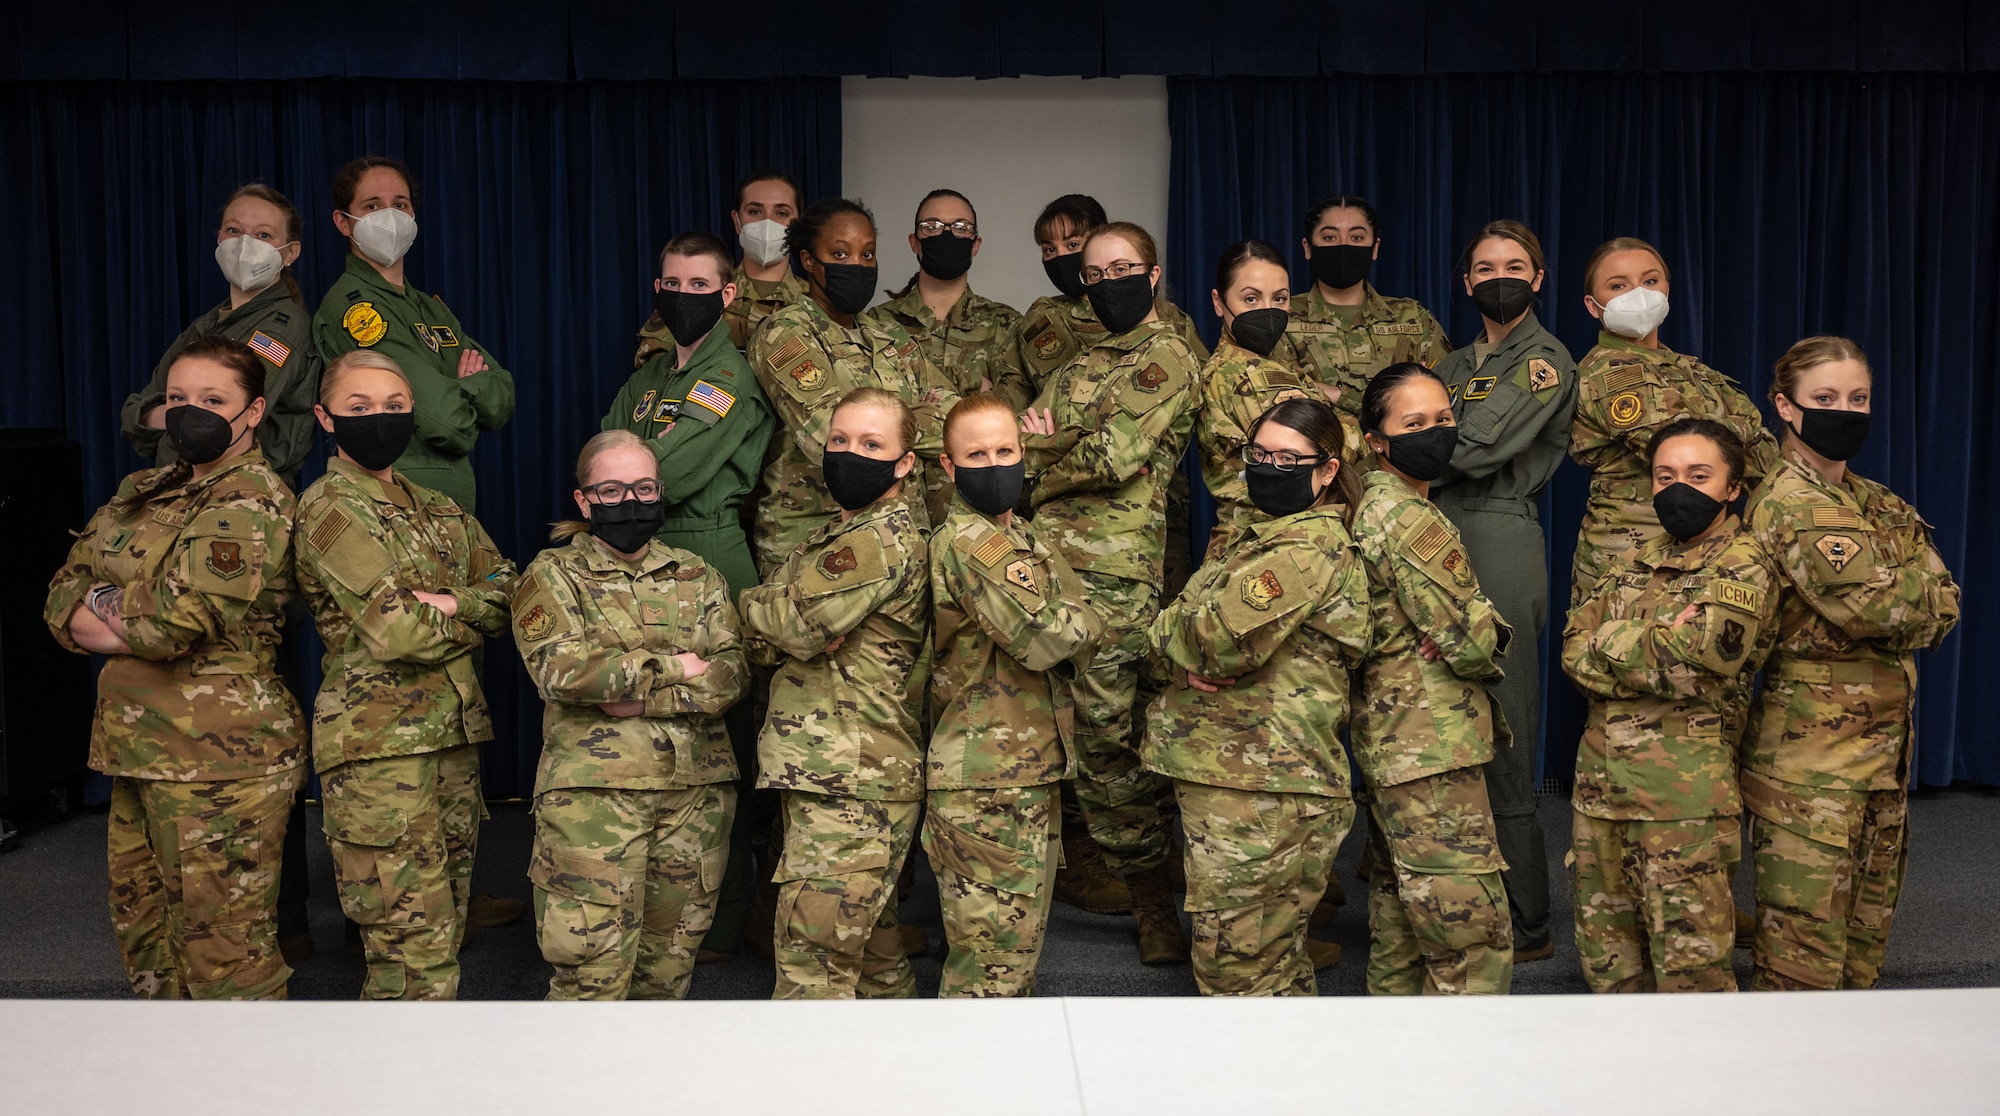 Missileers from the 341st Operations Group pose for a group photo in honor of International Women’s Day, Malmstrom Air Force Base, Montana, March 10, 2021.